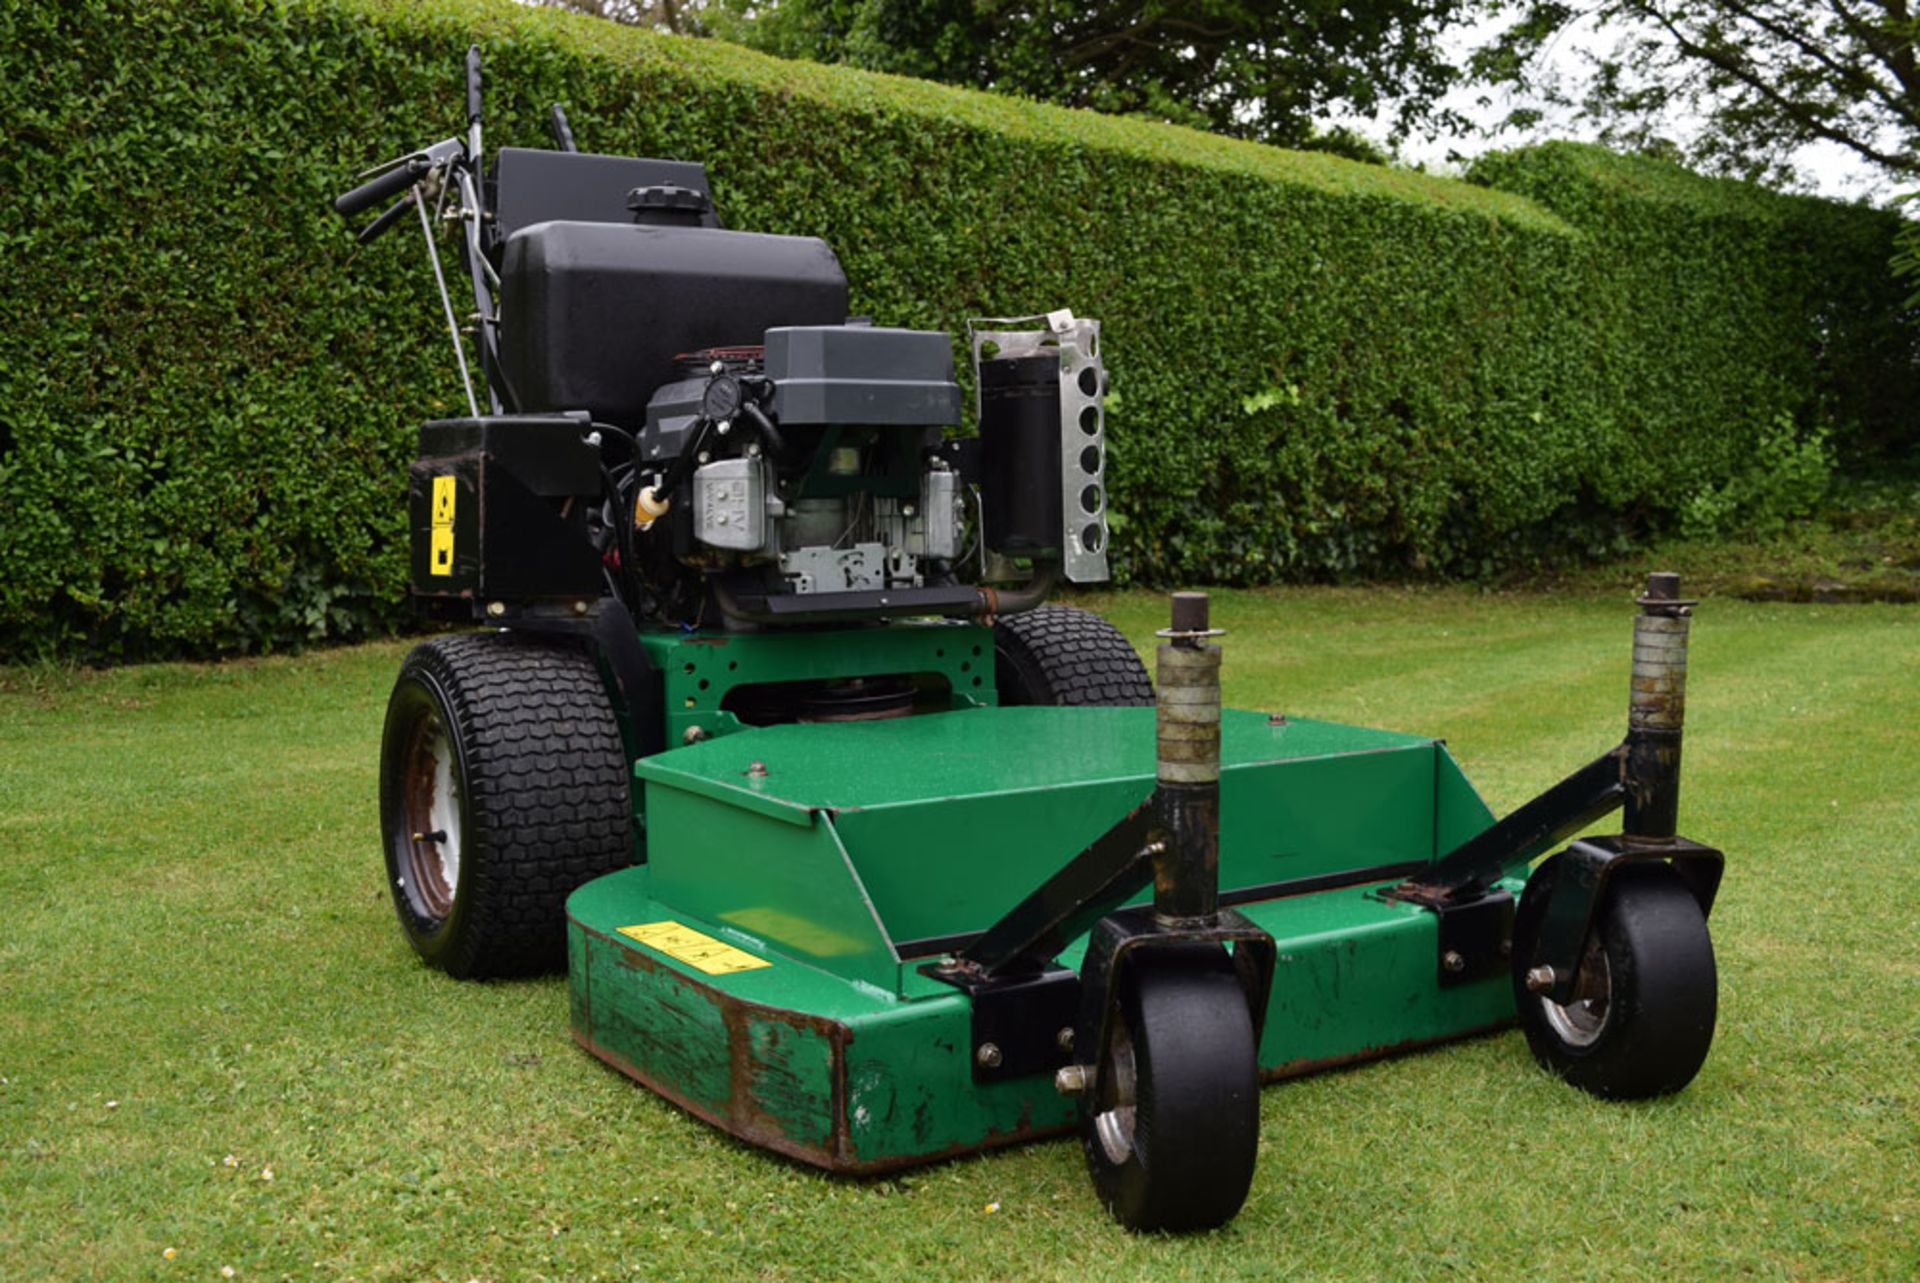 2008 Ransomes Pedestrian 36"""" Commercial Walk Behind Zero Turn Rotary Mower - Image 3 of 3